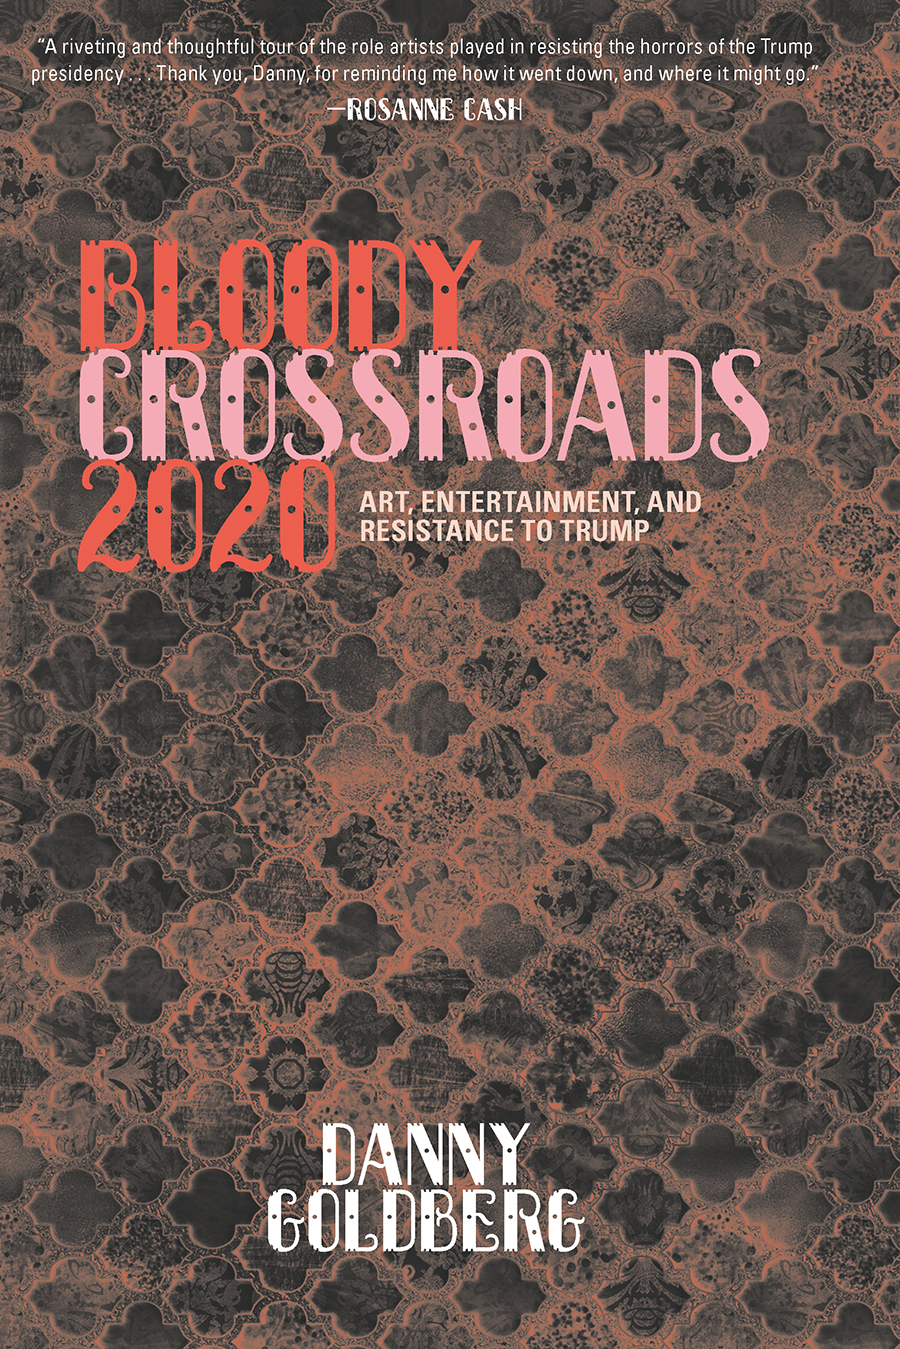 Book Launch: Bloody Crossroads 2020 by Danny Goldberg in conversation with Mark Jacobson